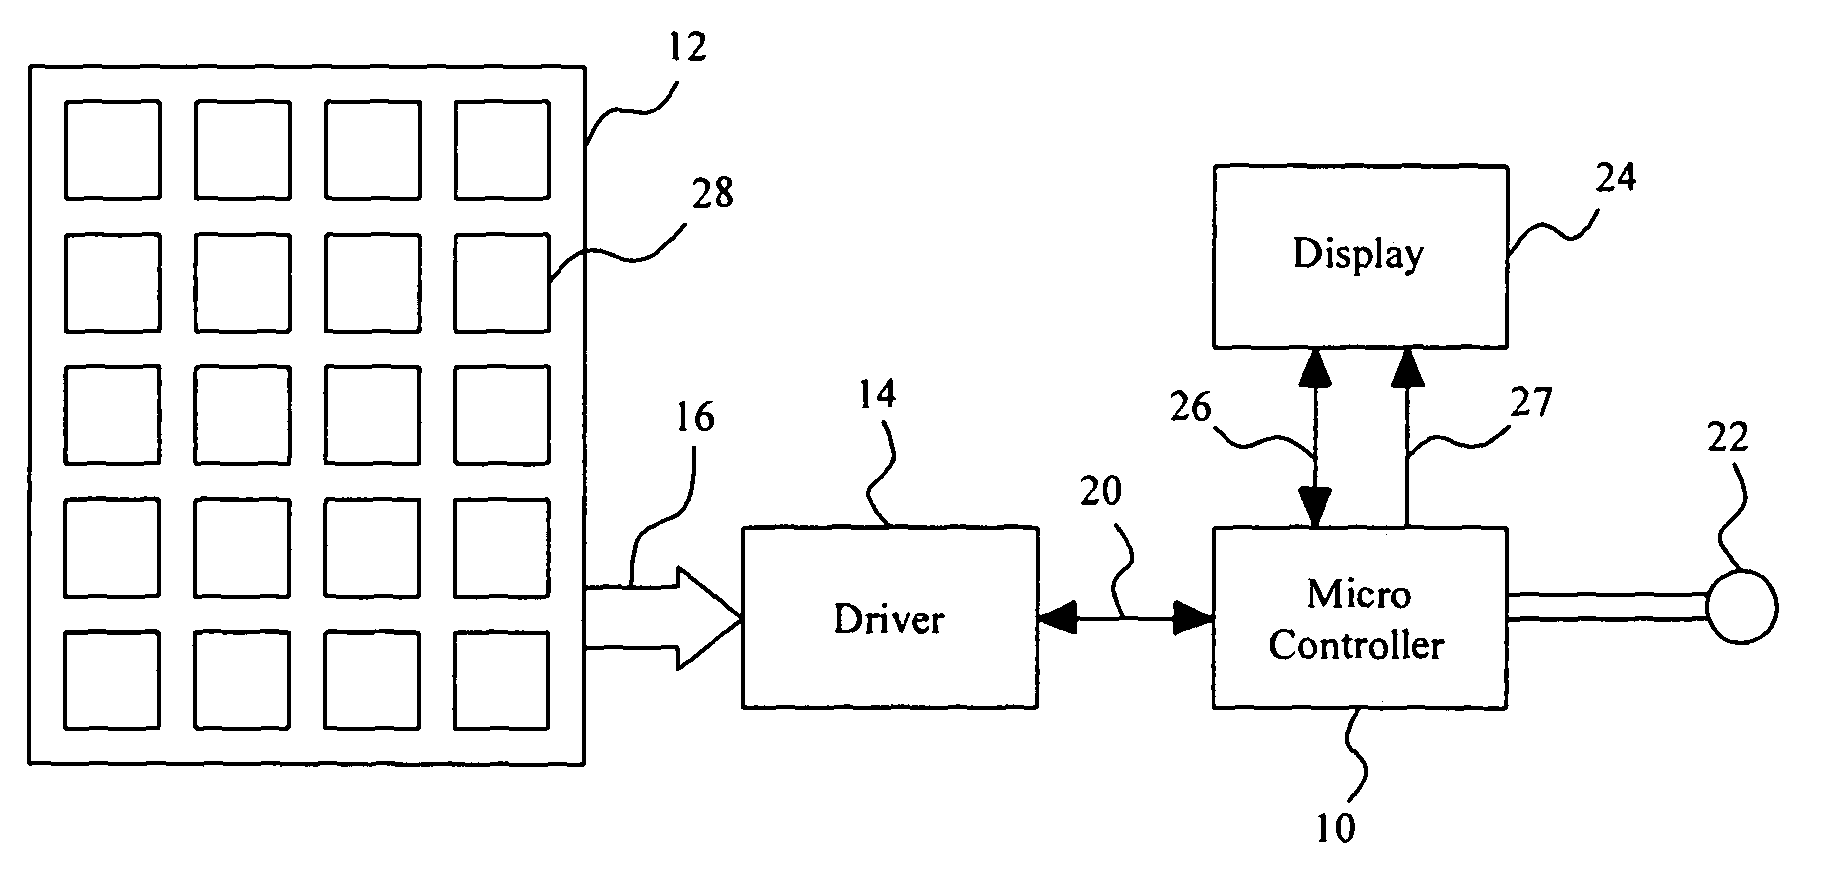 Remote controller with touchpad for receiving handwritten input functions